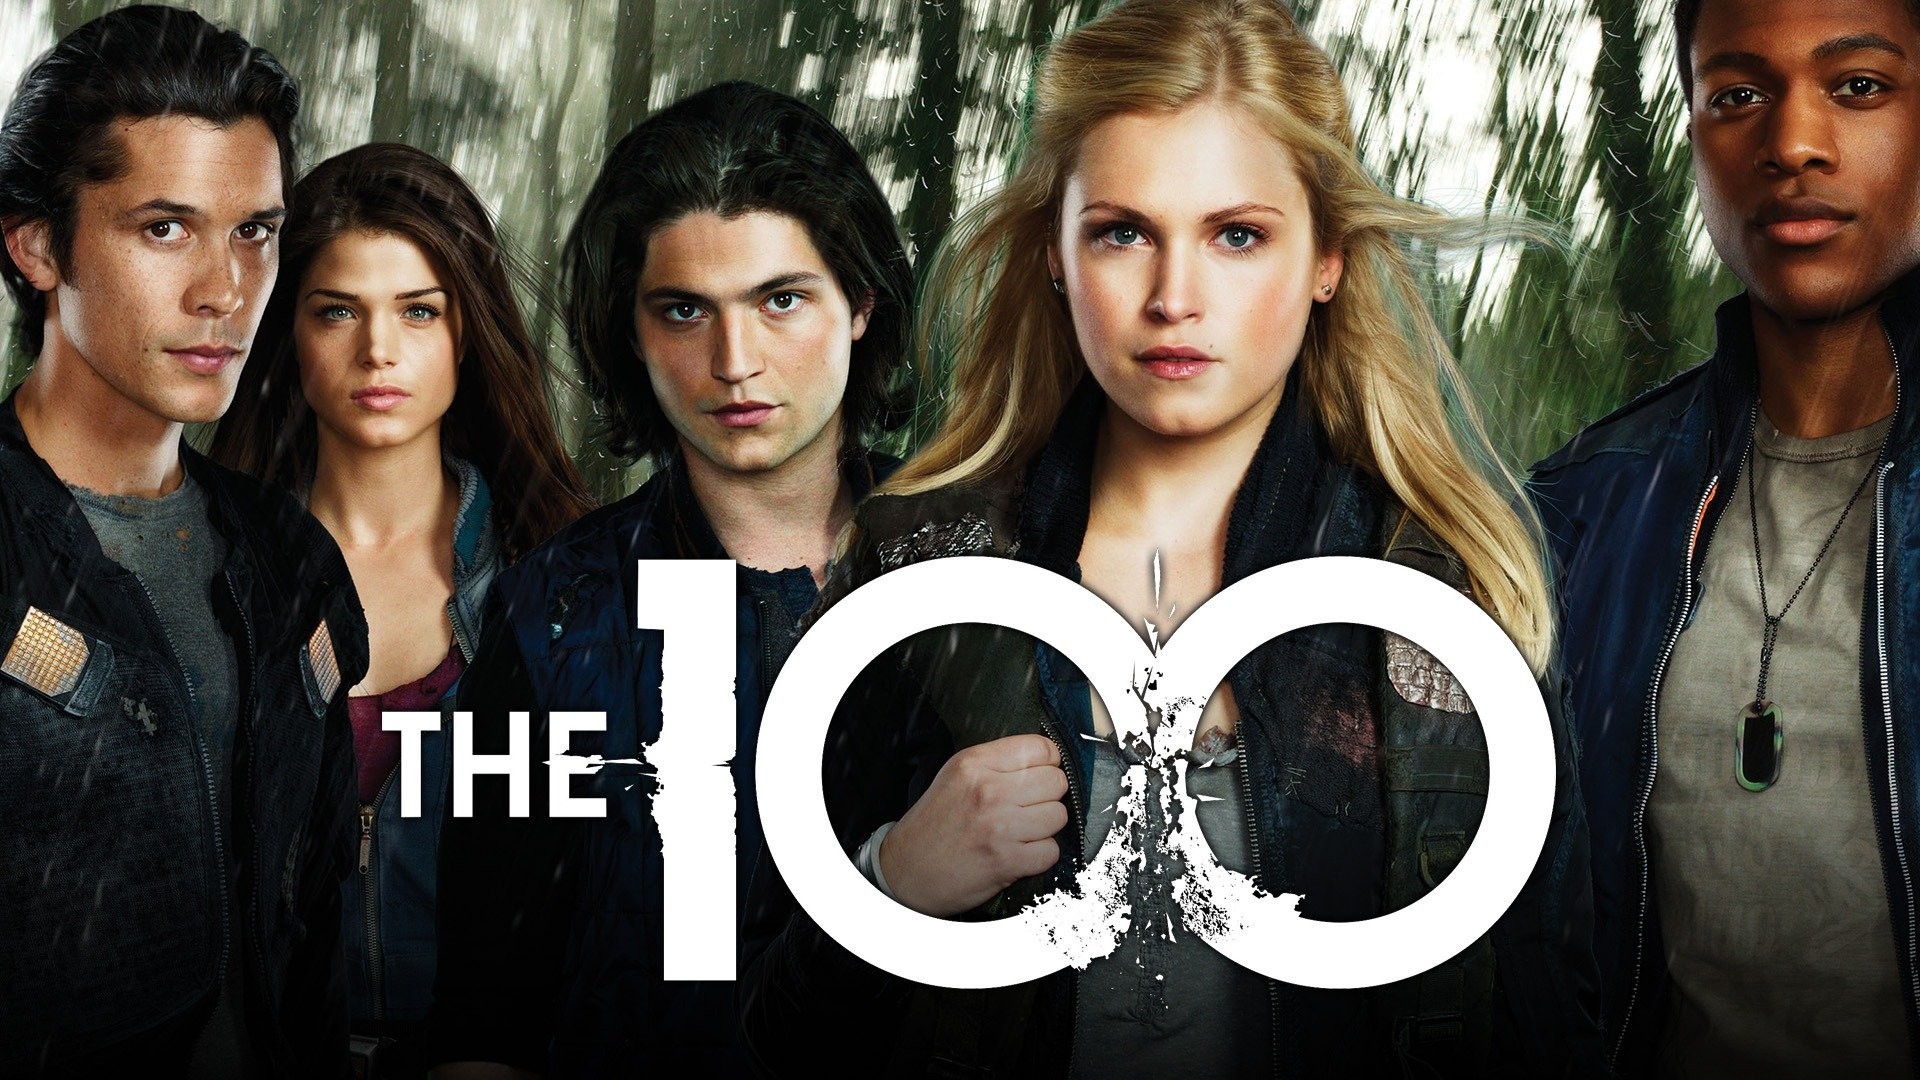 IMDb Ratings For The 100 : r/The100